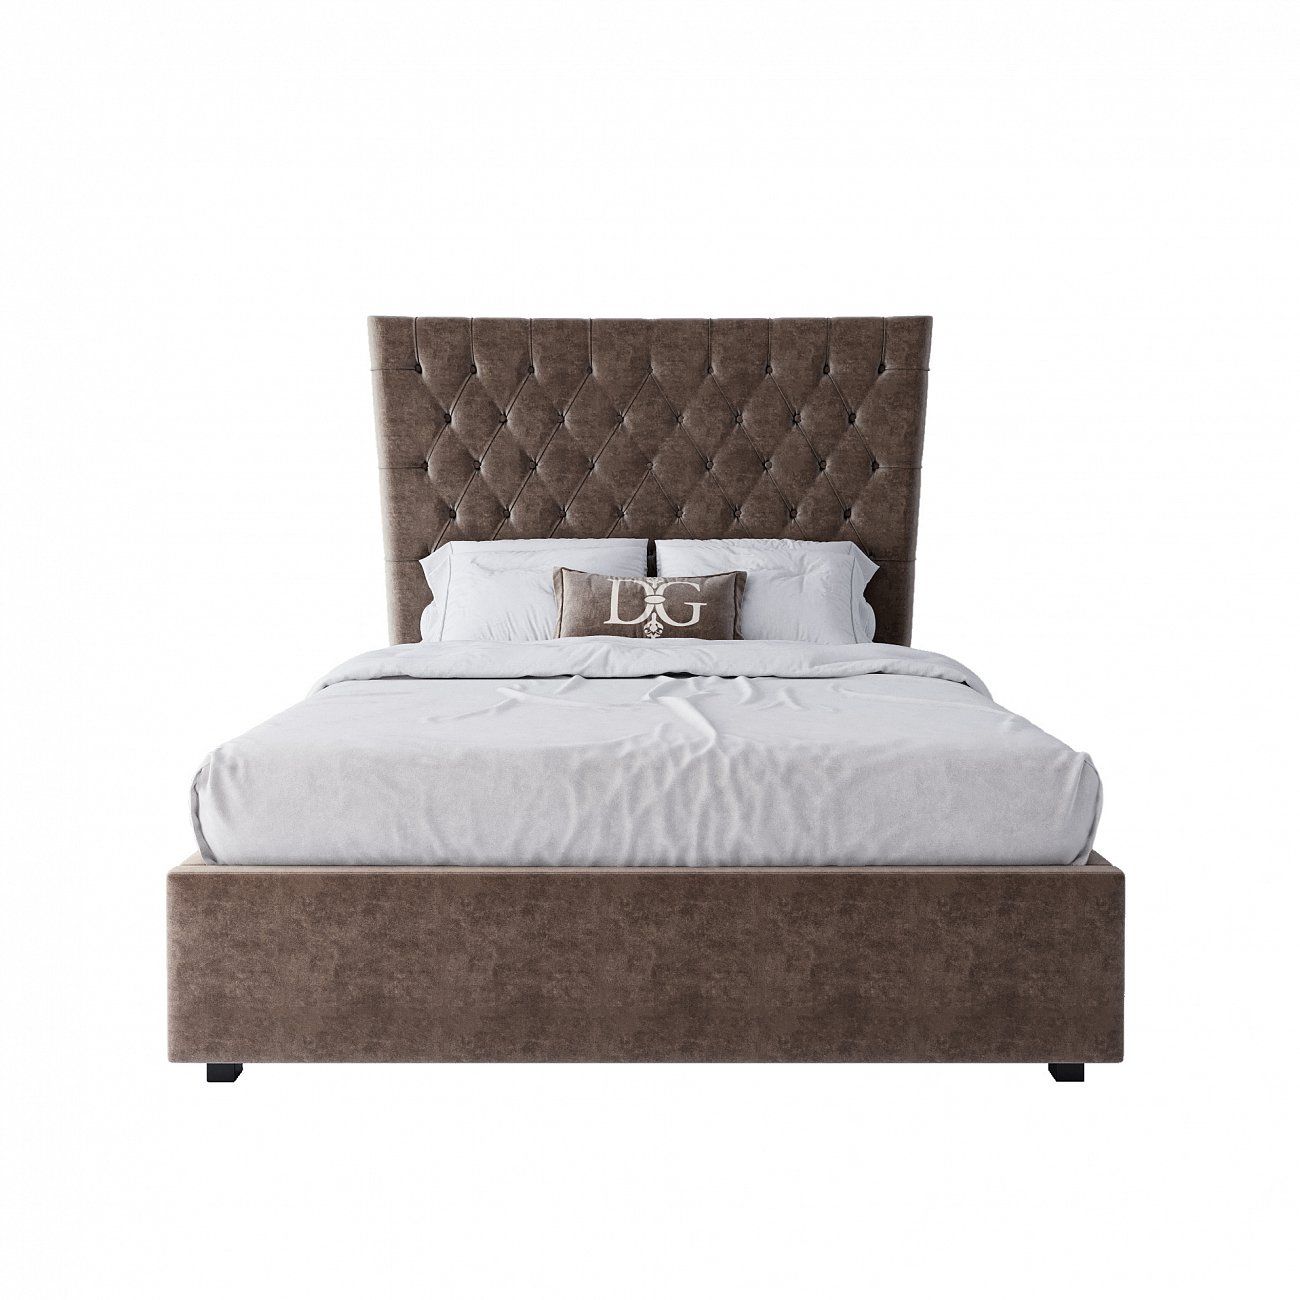 Teenage bed with carriage screed 140x200 grey-brown QuickSand